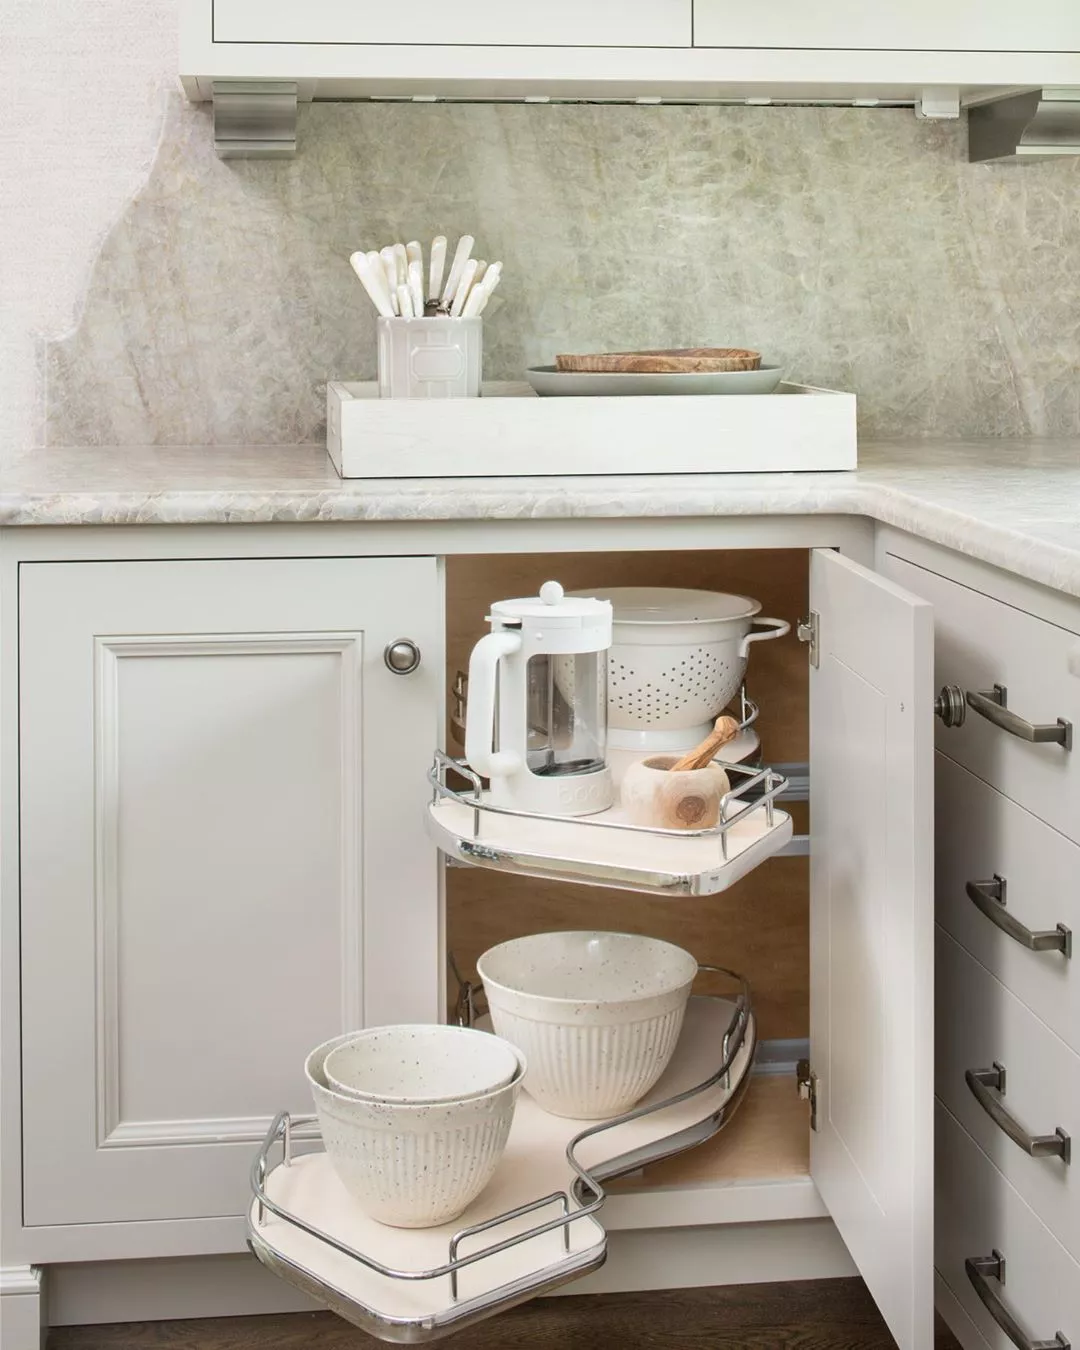 38 Handy Corner Storage Ideas that will Help You Maximize Your Space   Clever kitchen storage, Kitchen storage solutions, Corner kitchen cabinet